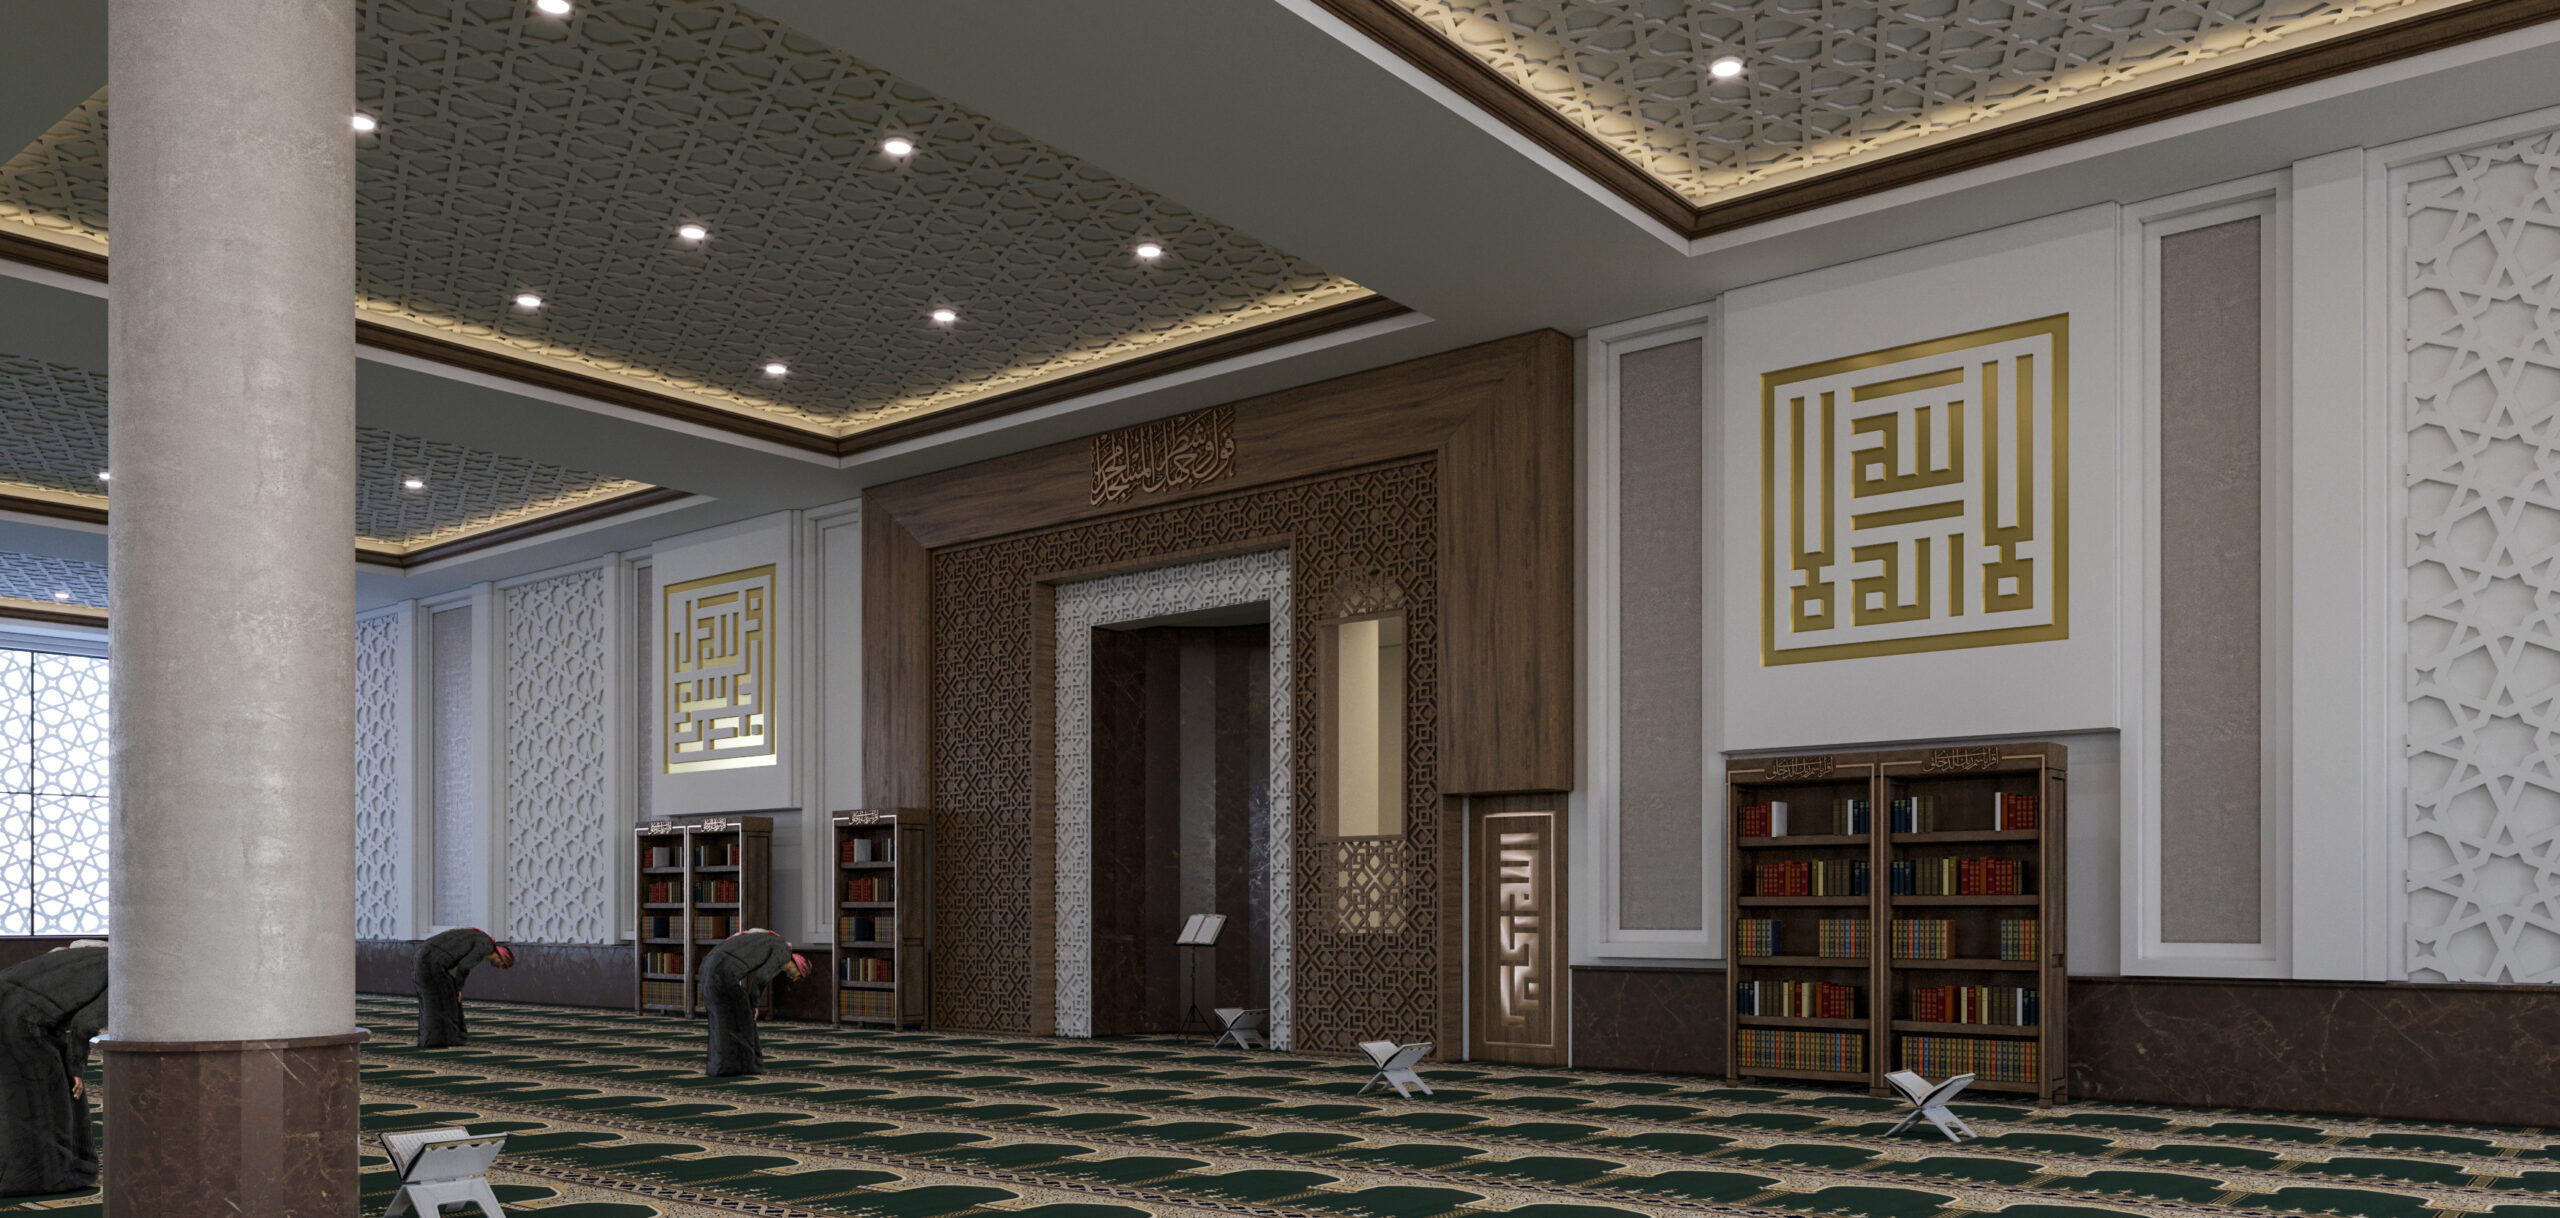 Design of Tuhayyi Mosque in Riyadh, area of 2,200 square meters and capacity for 2,000 worshipers, 2023